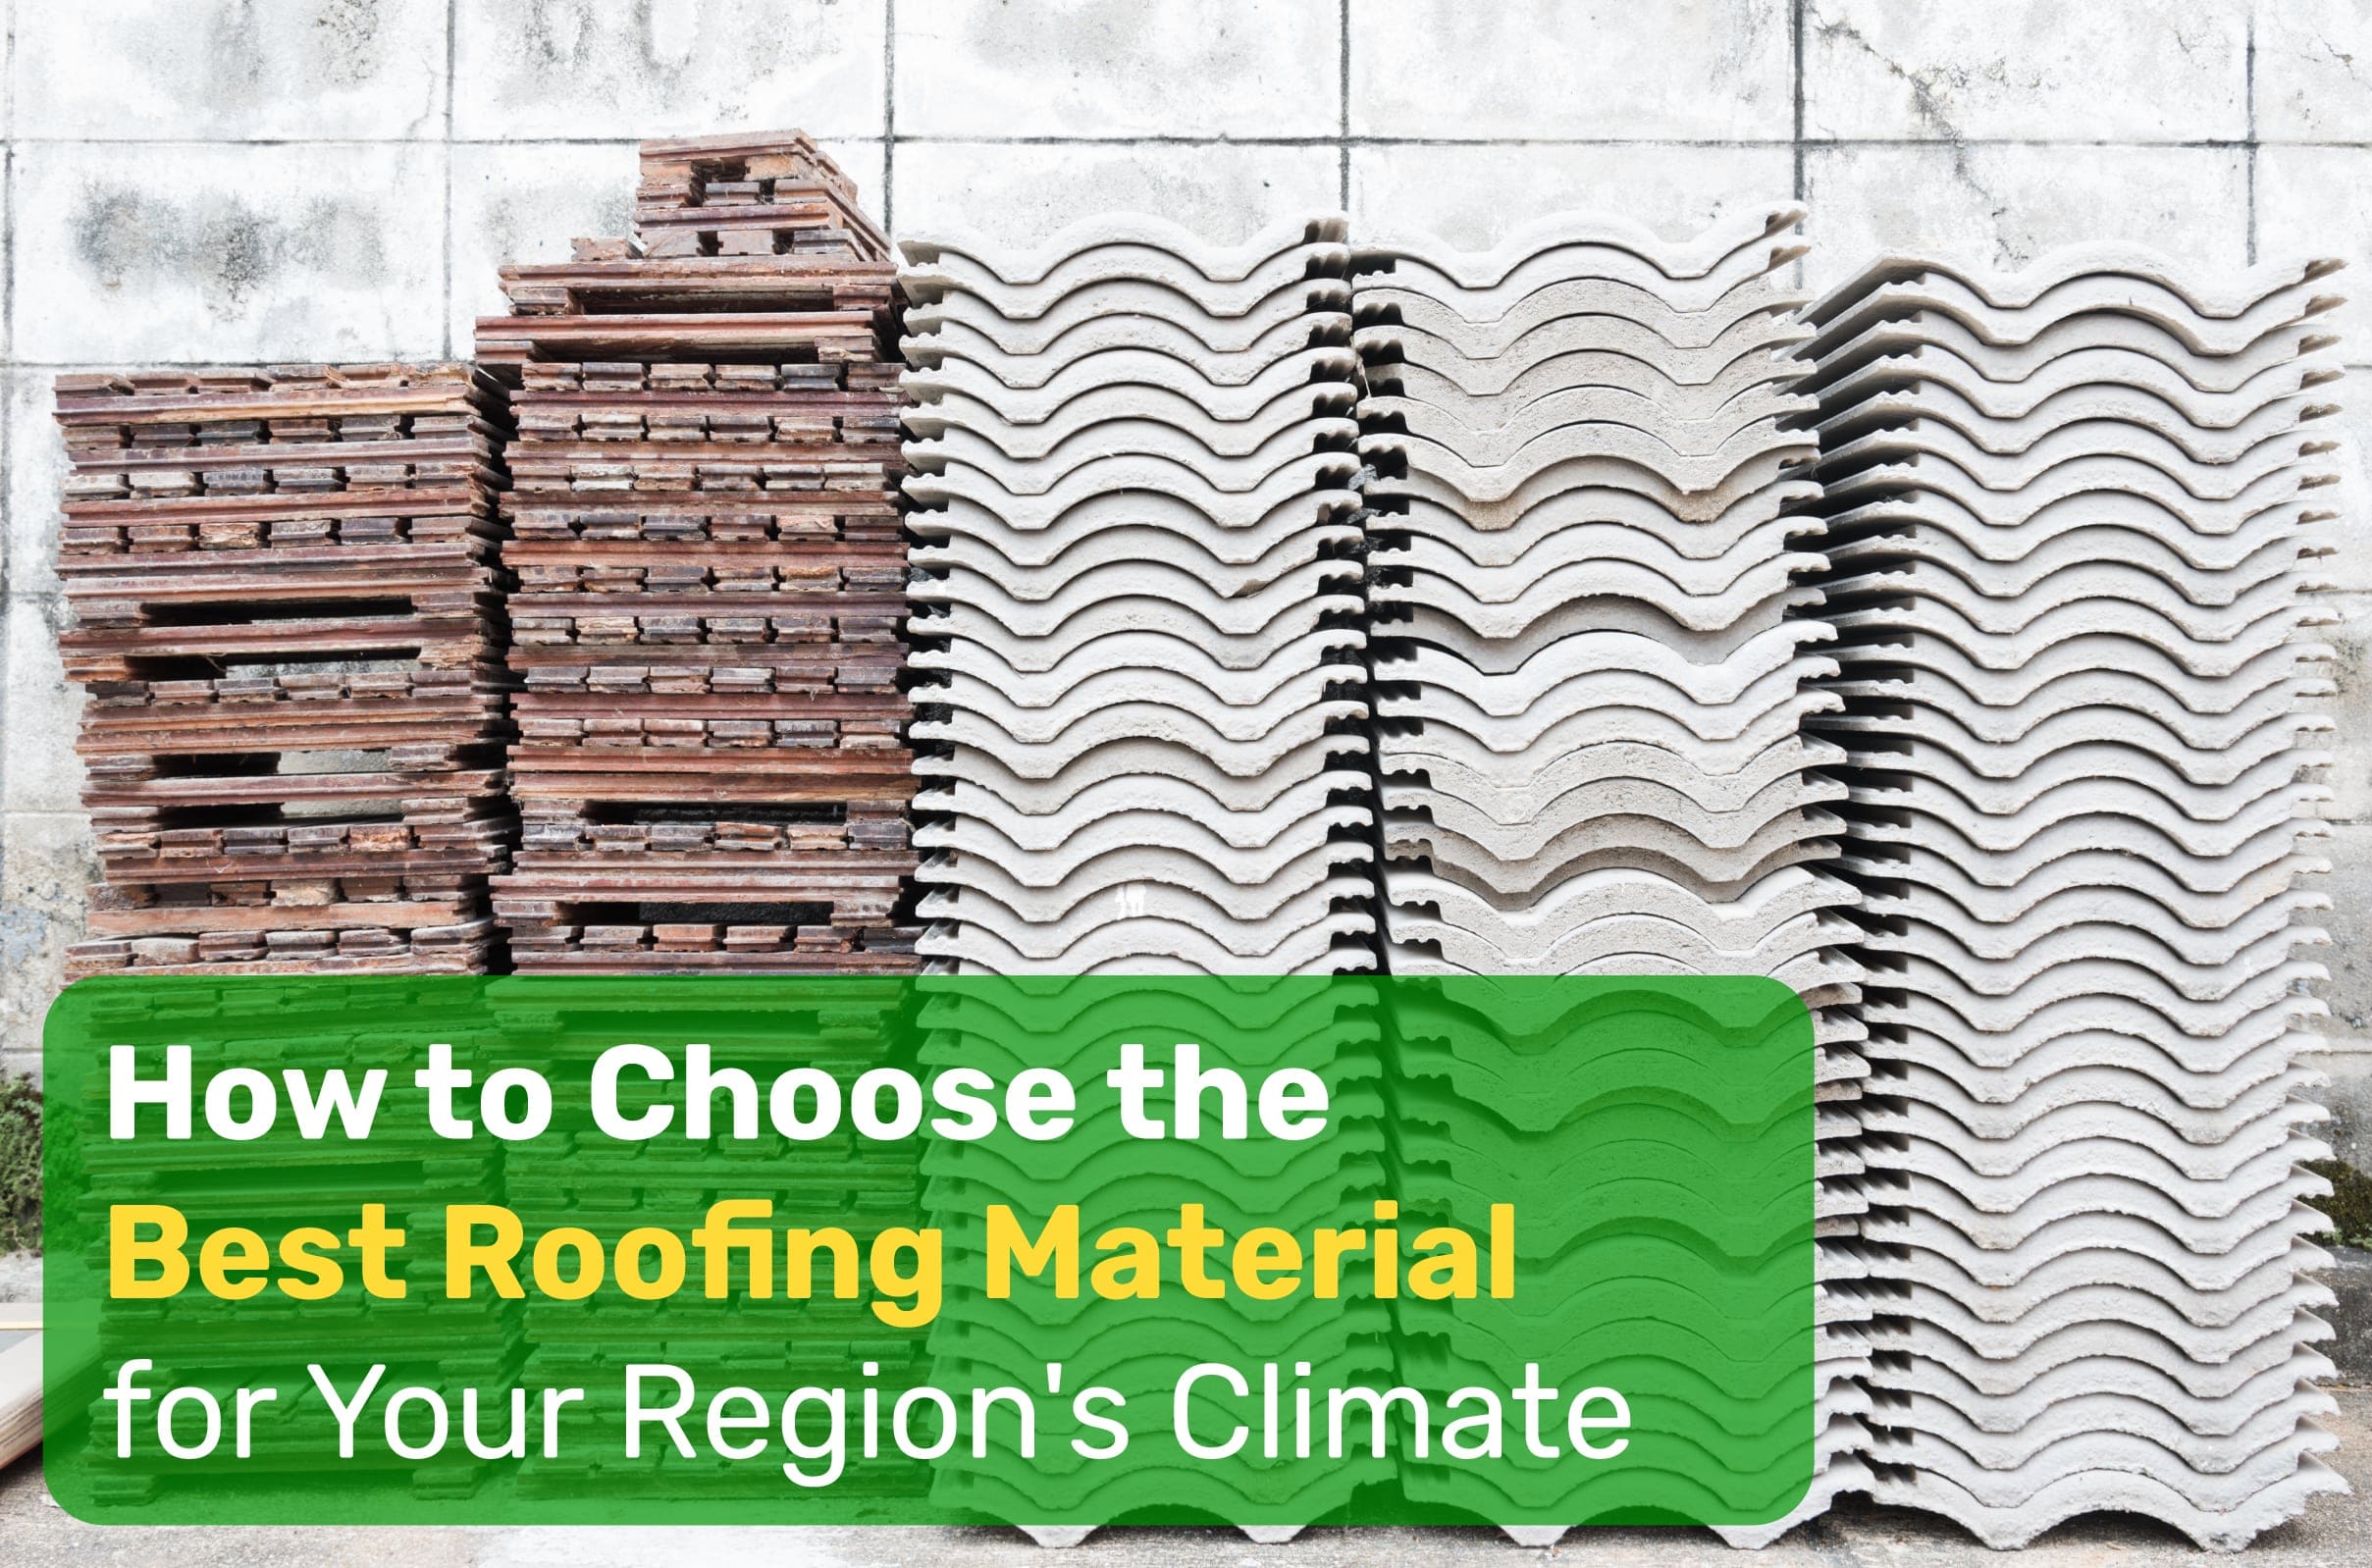 How to Choose the Best Roofing Material - Journey Builders